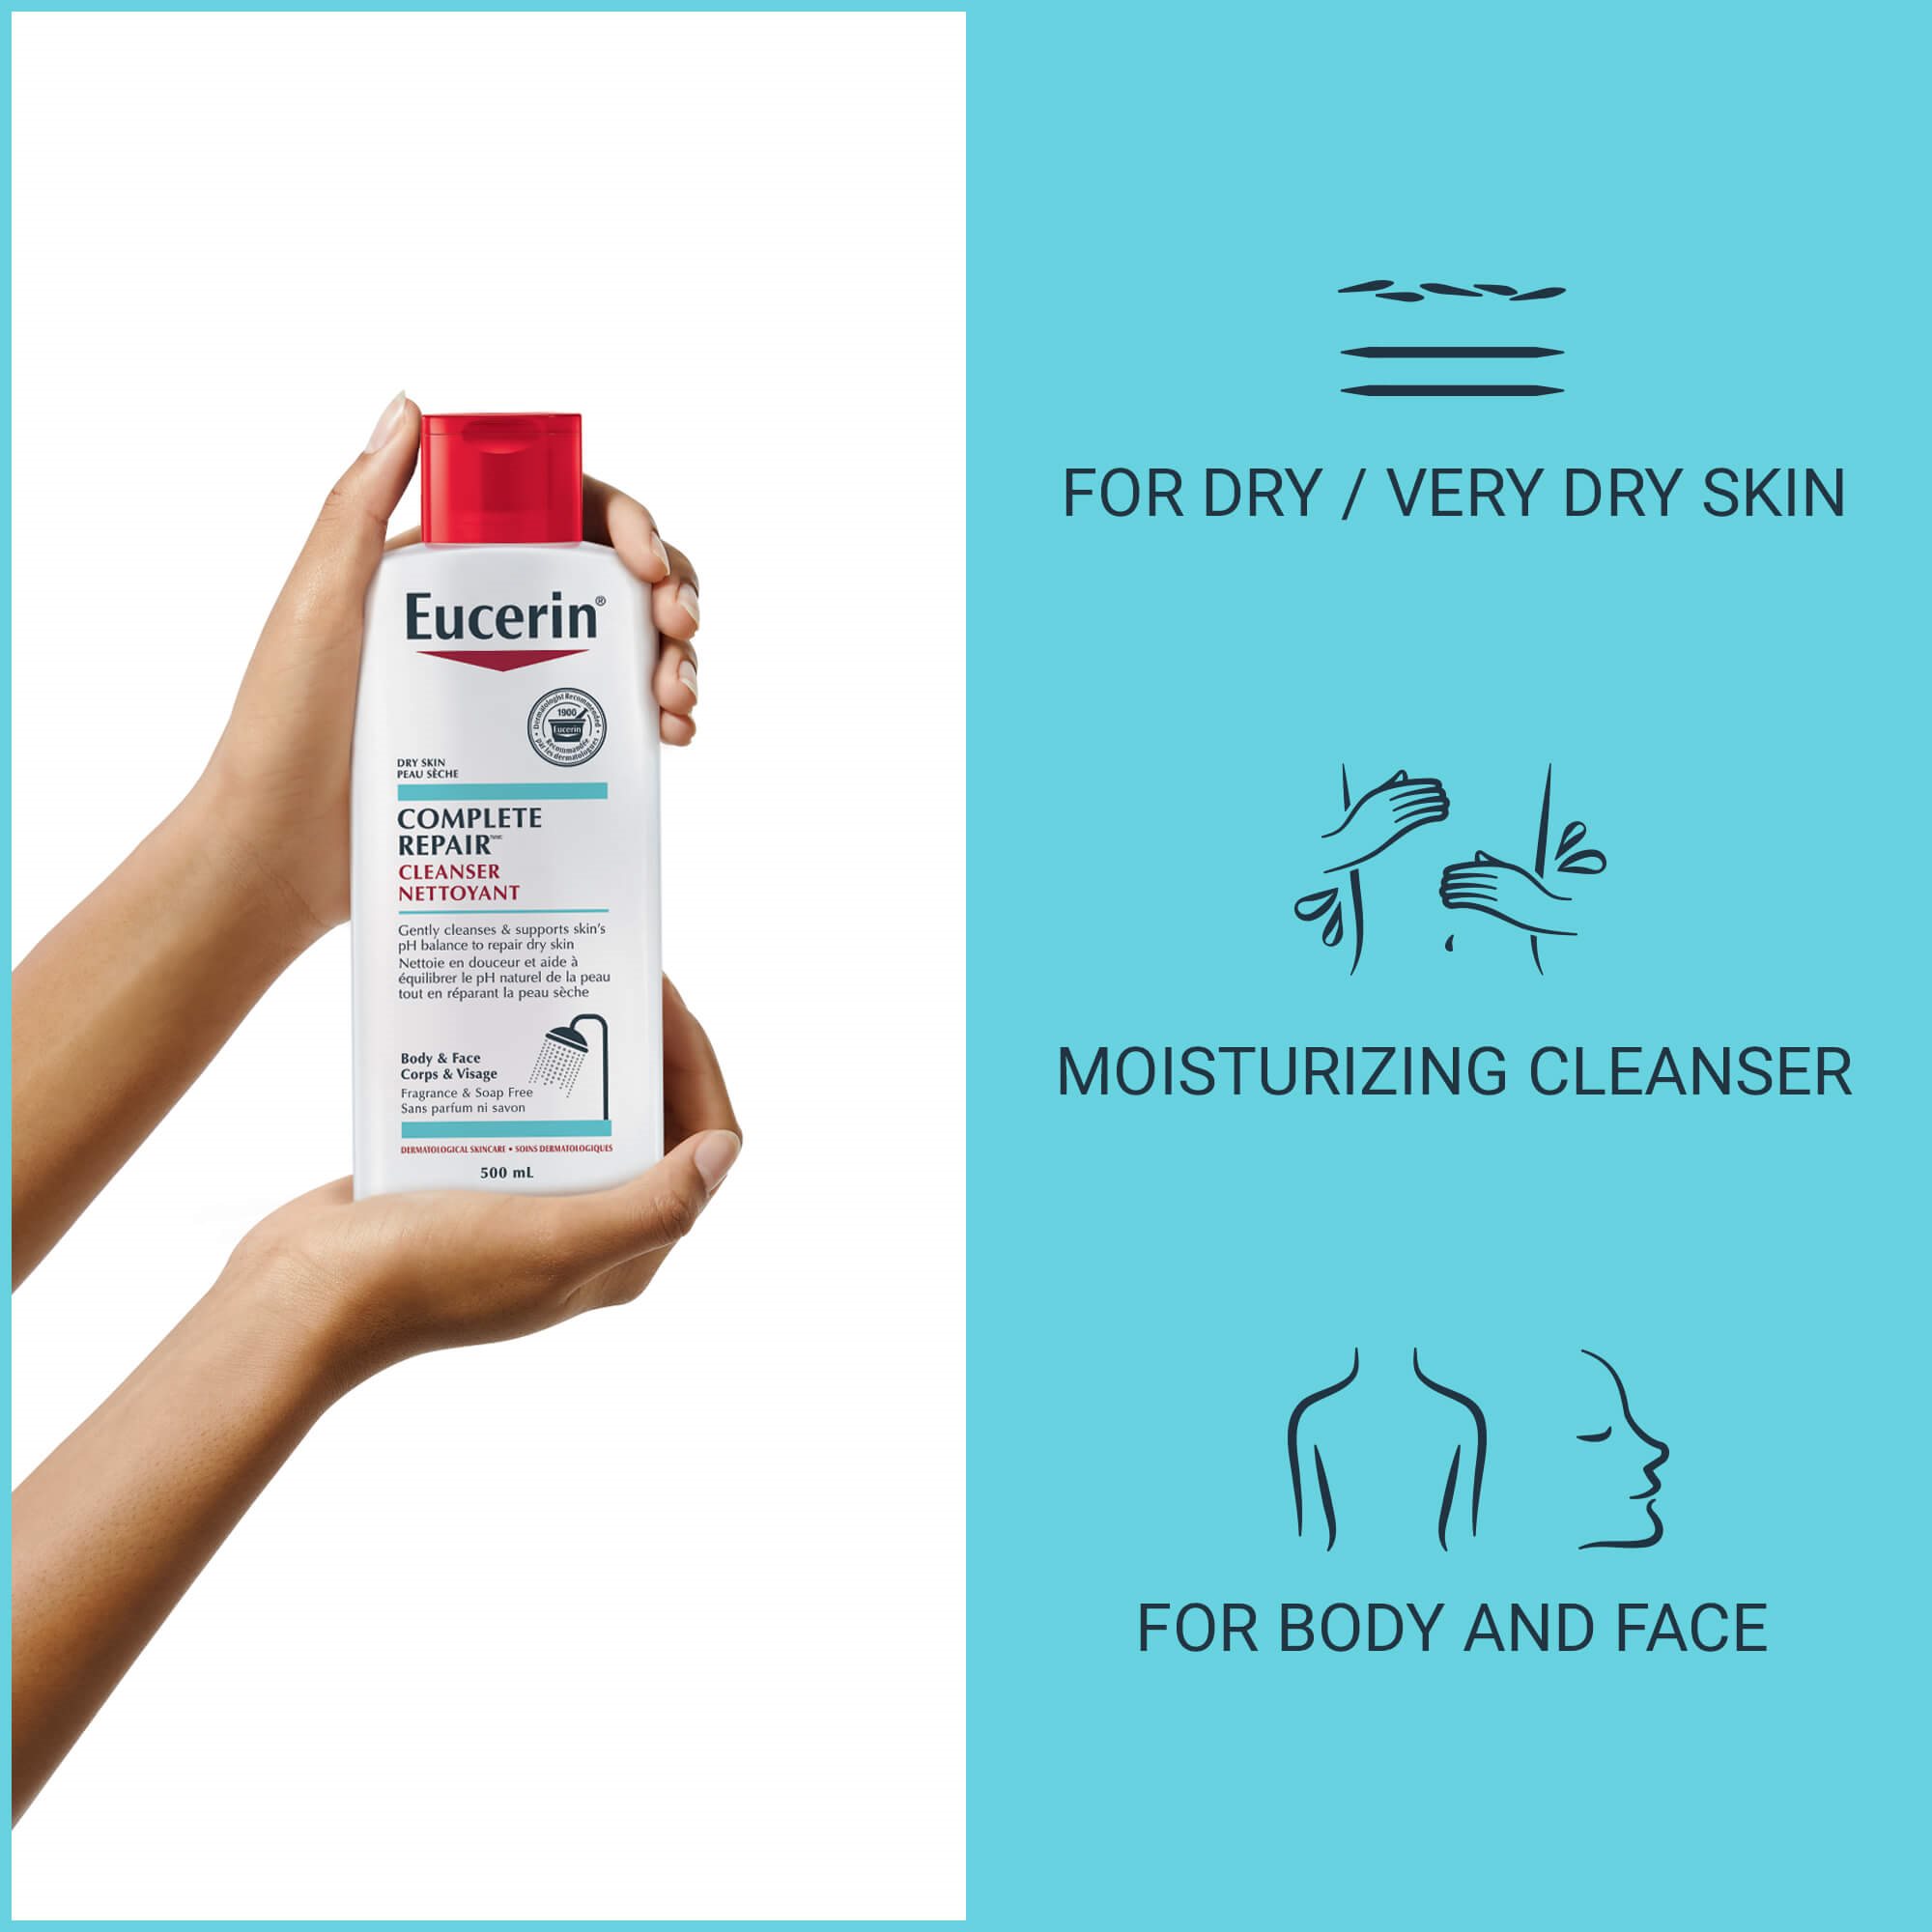 Image of a woman holding a bottle of Eucerin Complete Repair Cleanser.